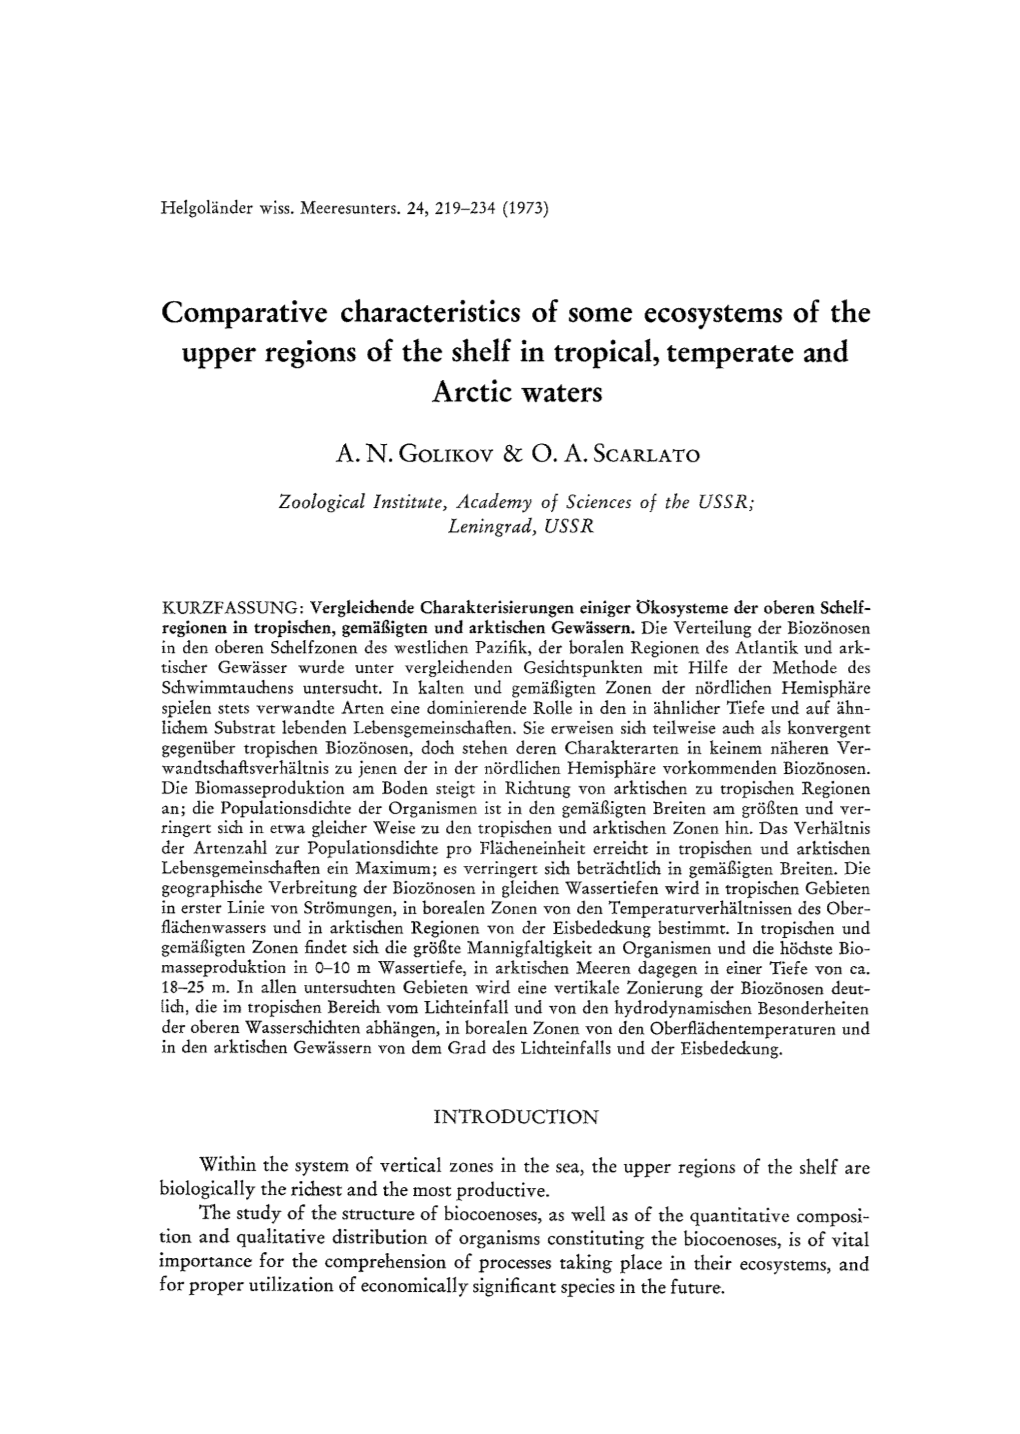 Comparative Characteristics of Some Ecosystems of the Upper Regions of the Shelf in Tropical, Temperate and Arctic Waters